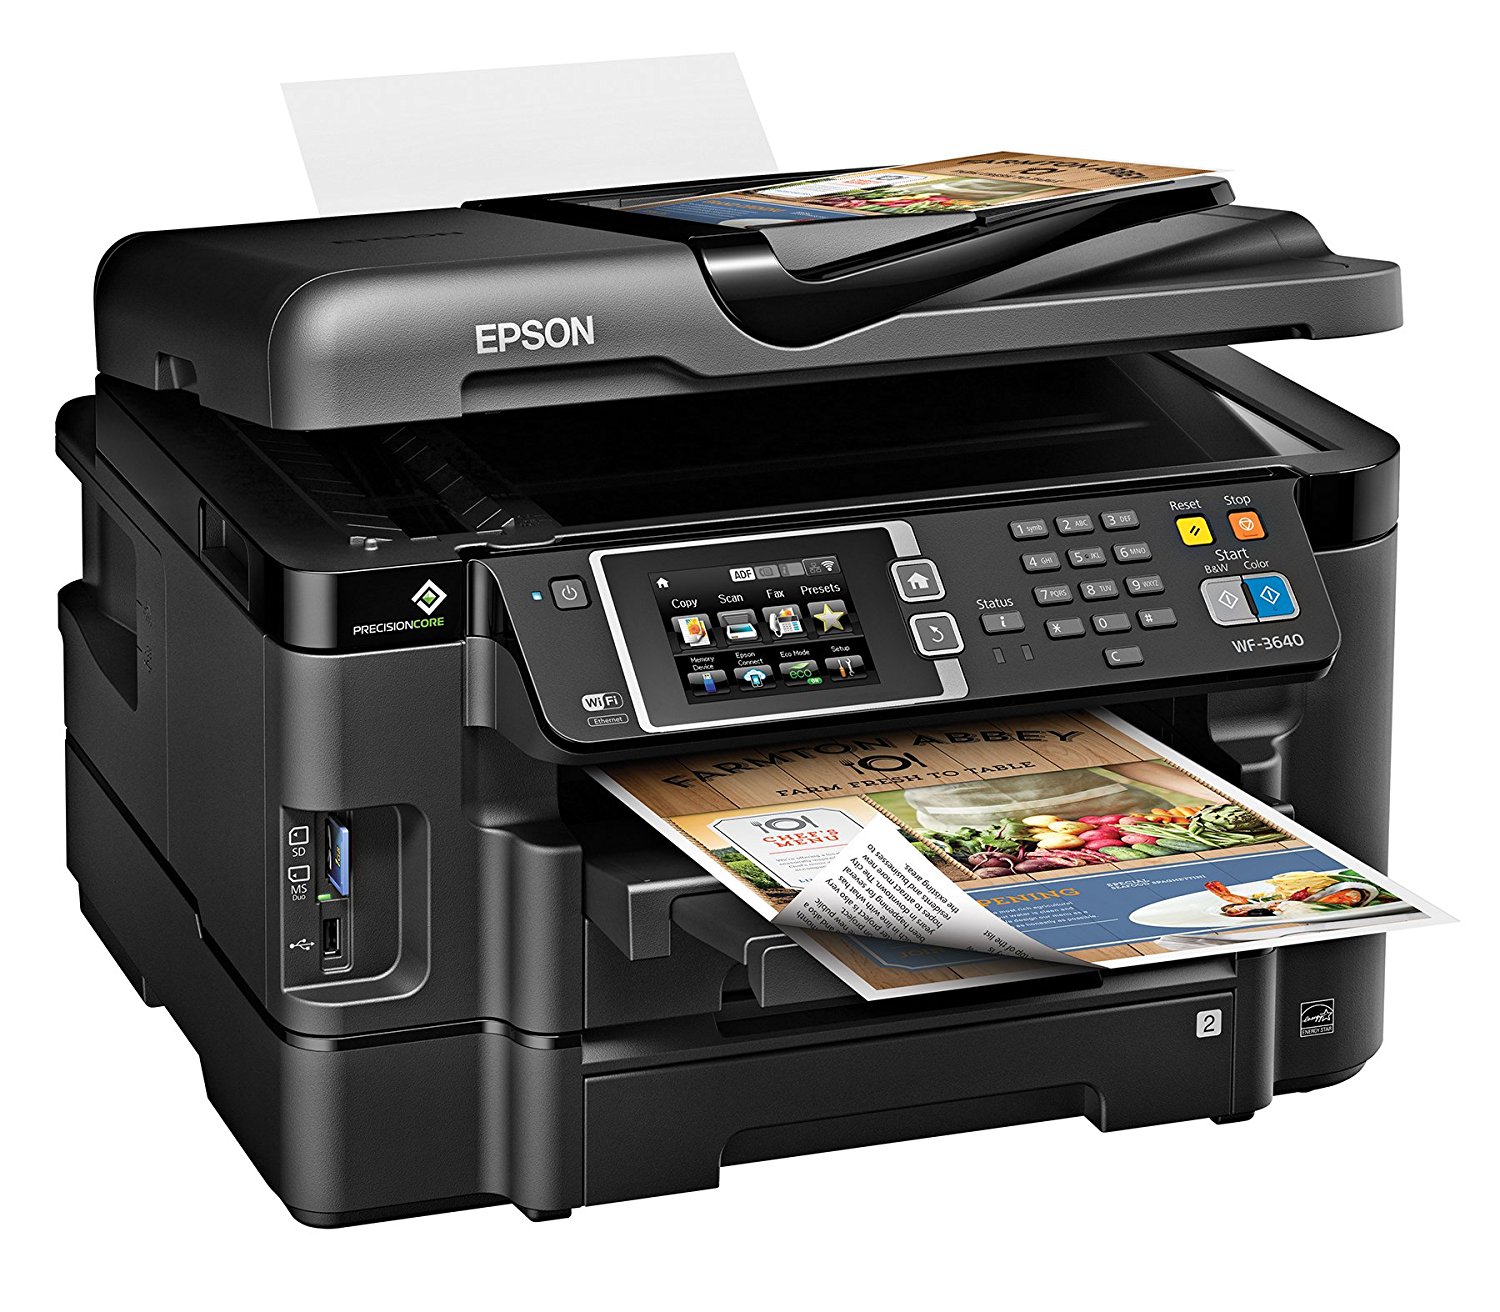 Epson Workforce Wf 3640 Wireless Color All In One Inkjet Printer With Scanner And Copier Free 2644